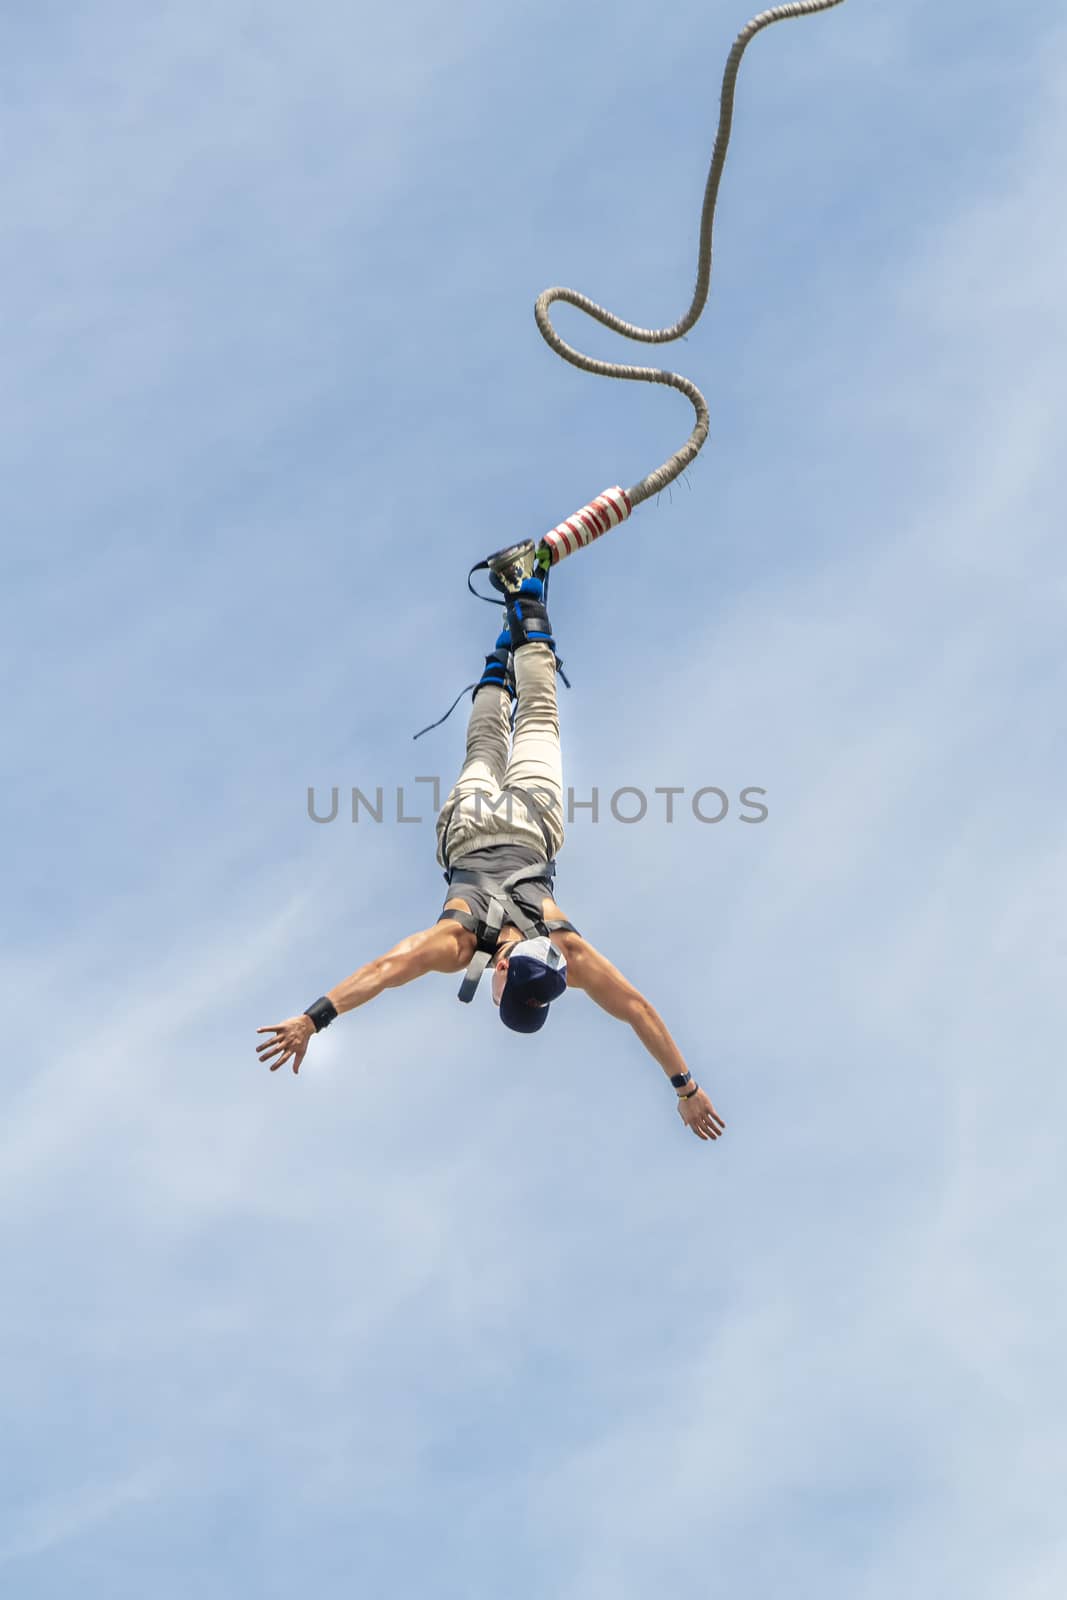 Bungee jumper jump from a platform hanging on the crane into the water against a pur blue spring sky of The Hague, Netherlands